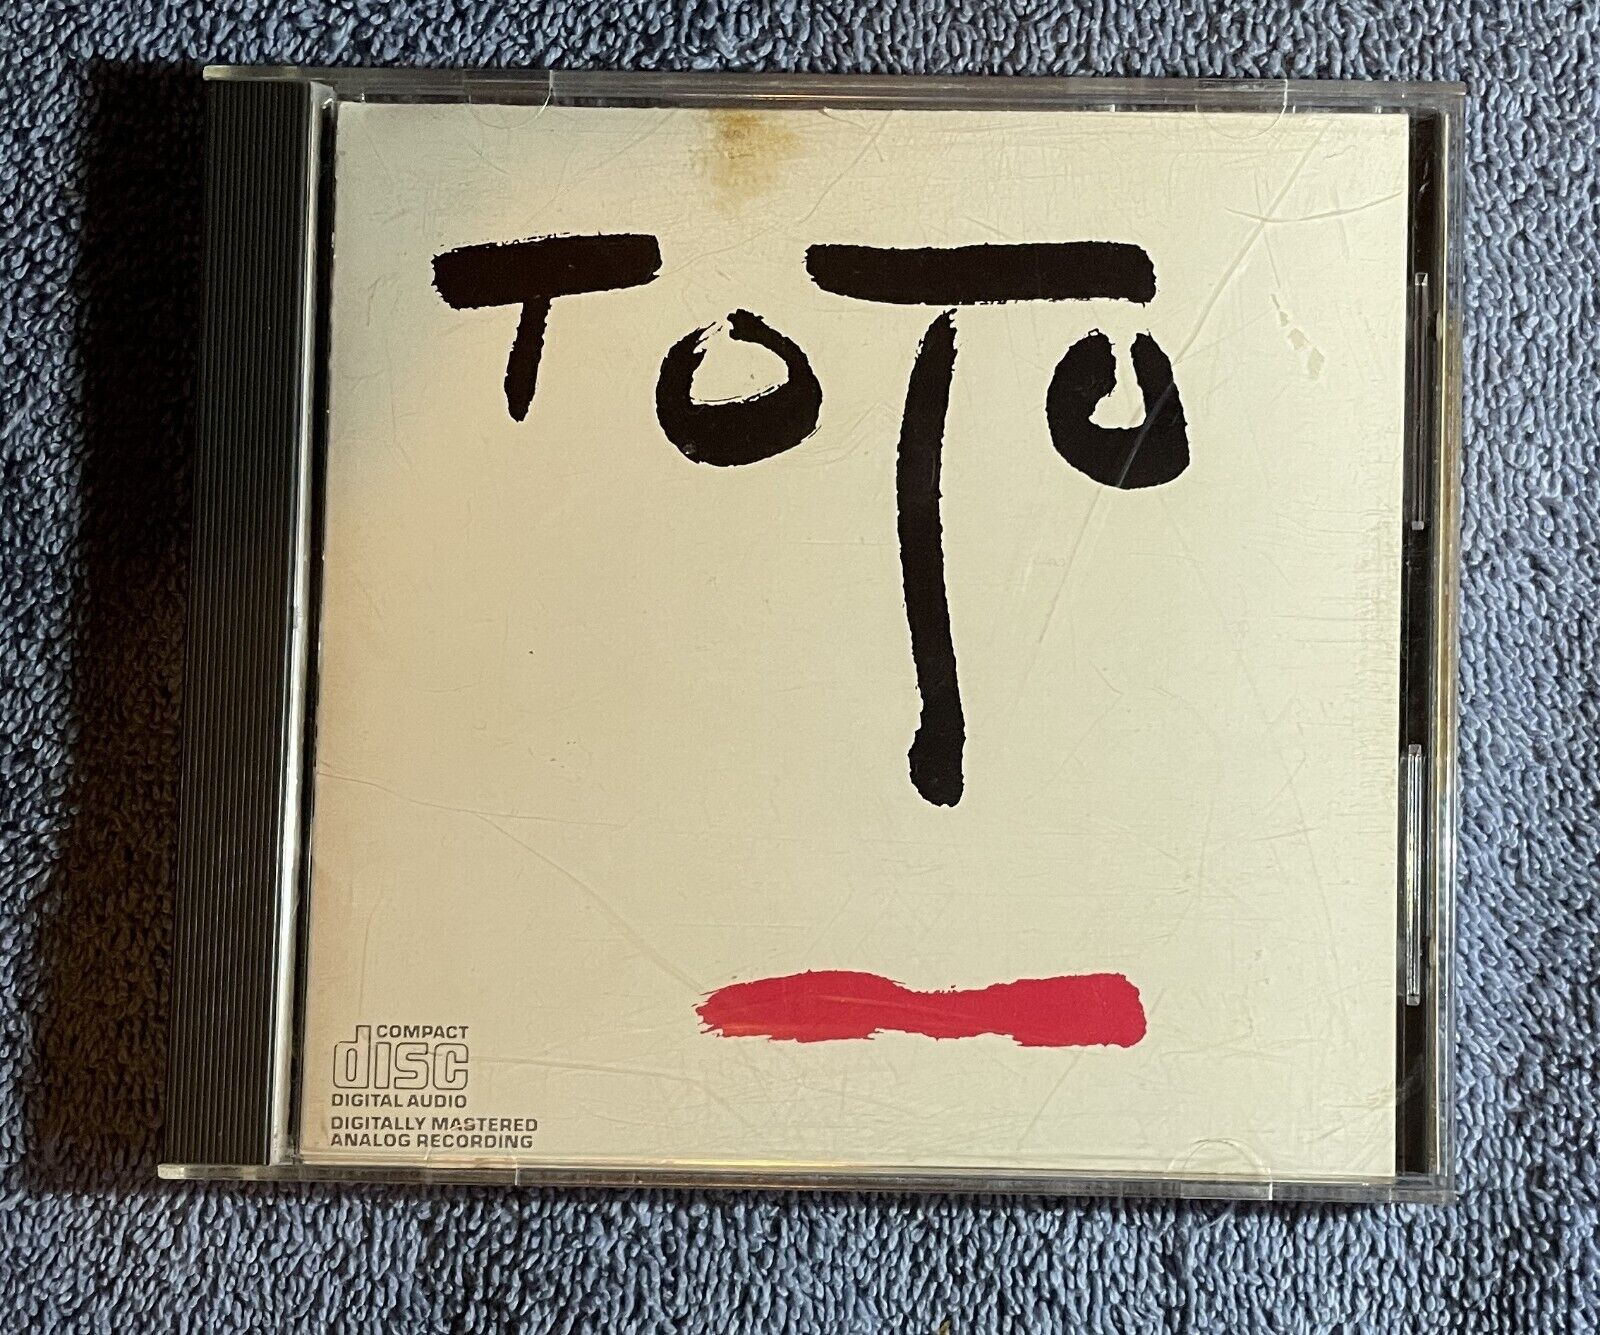 Turn Back by Toto (CD, 1981 Columbia) MANUFACTURED IN JAPAN FOR CBS RARE